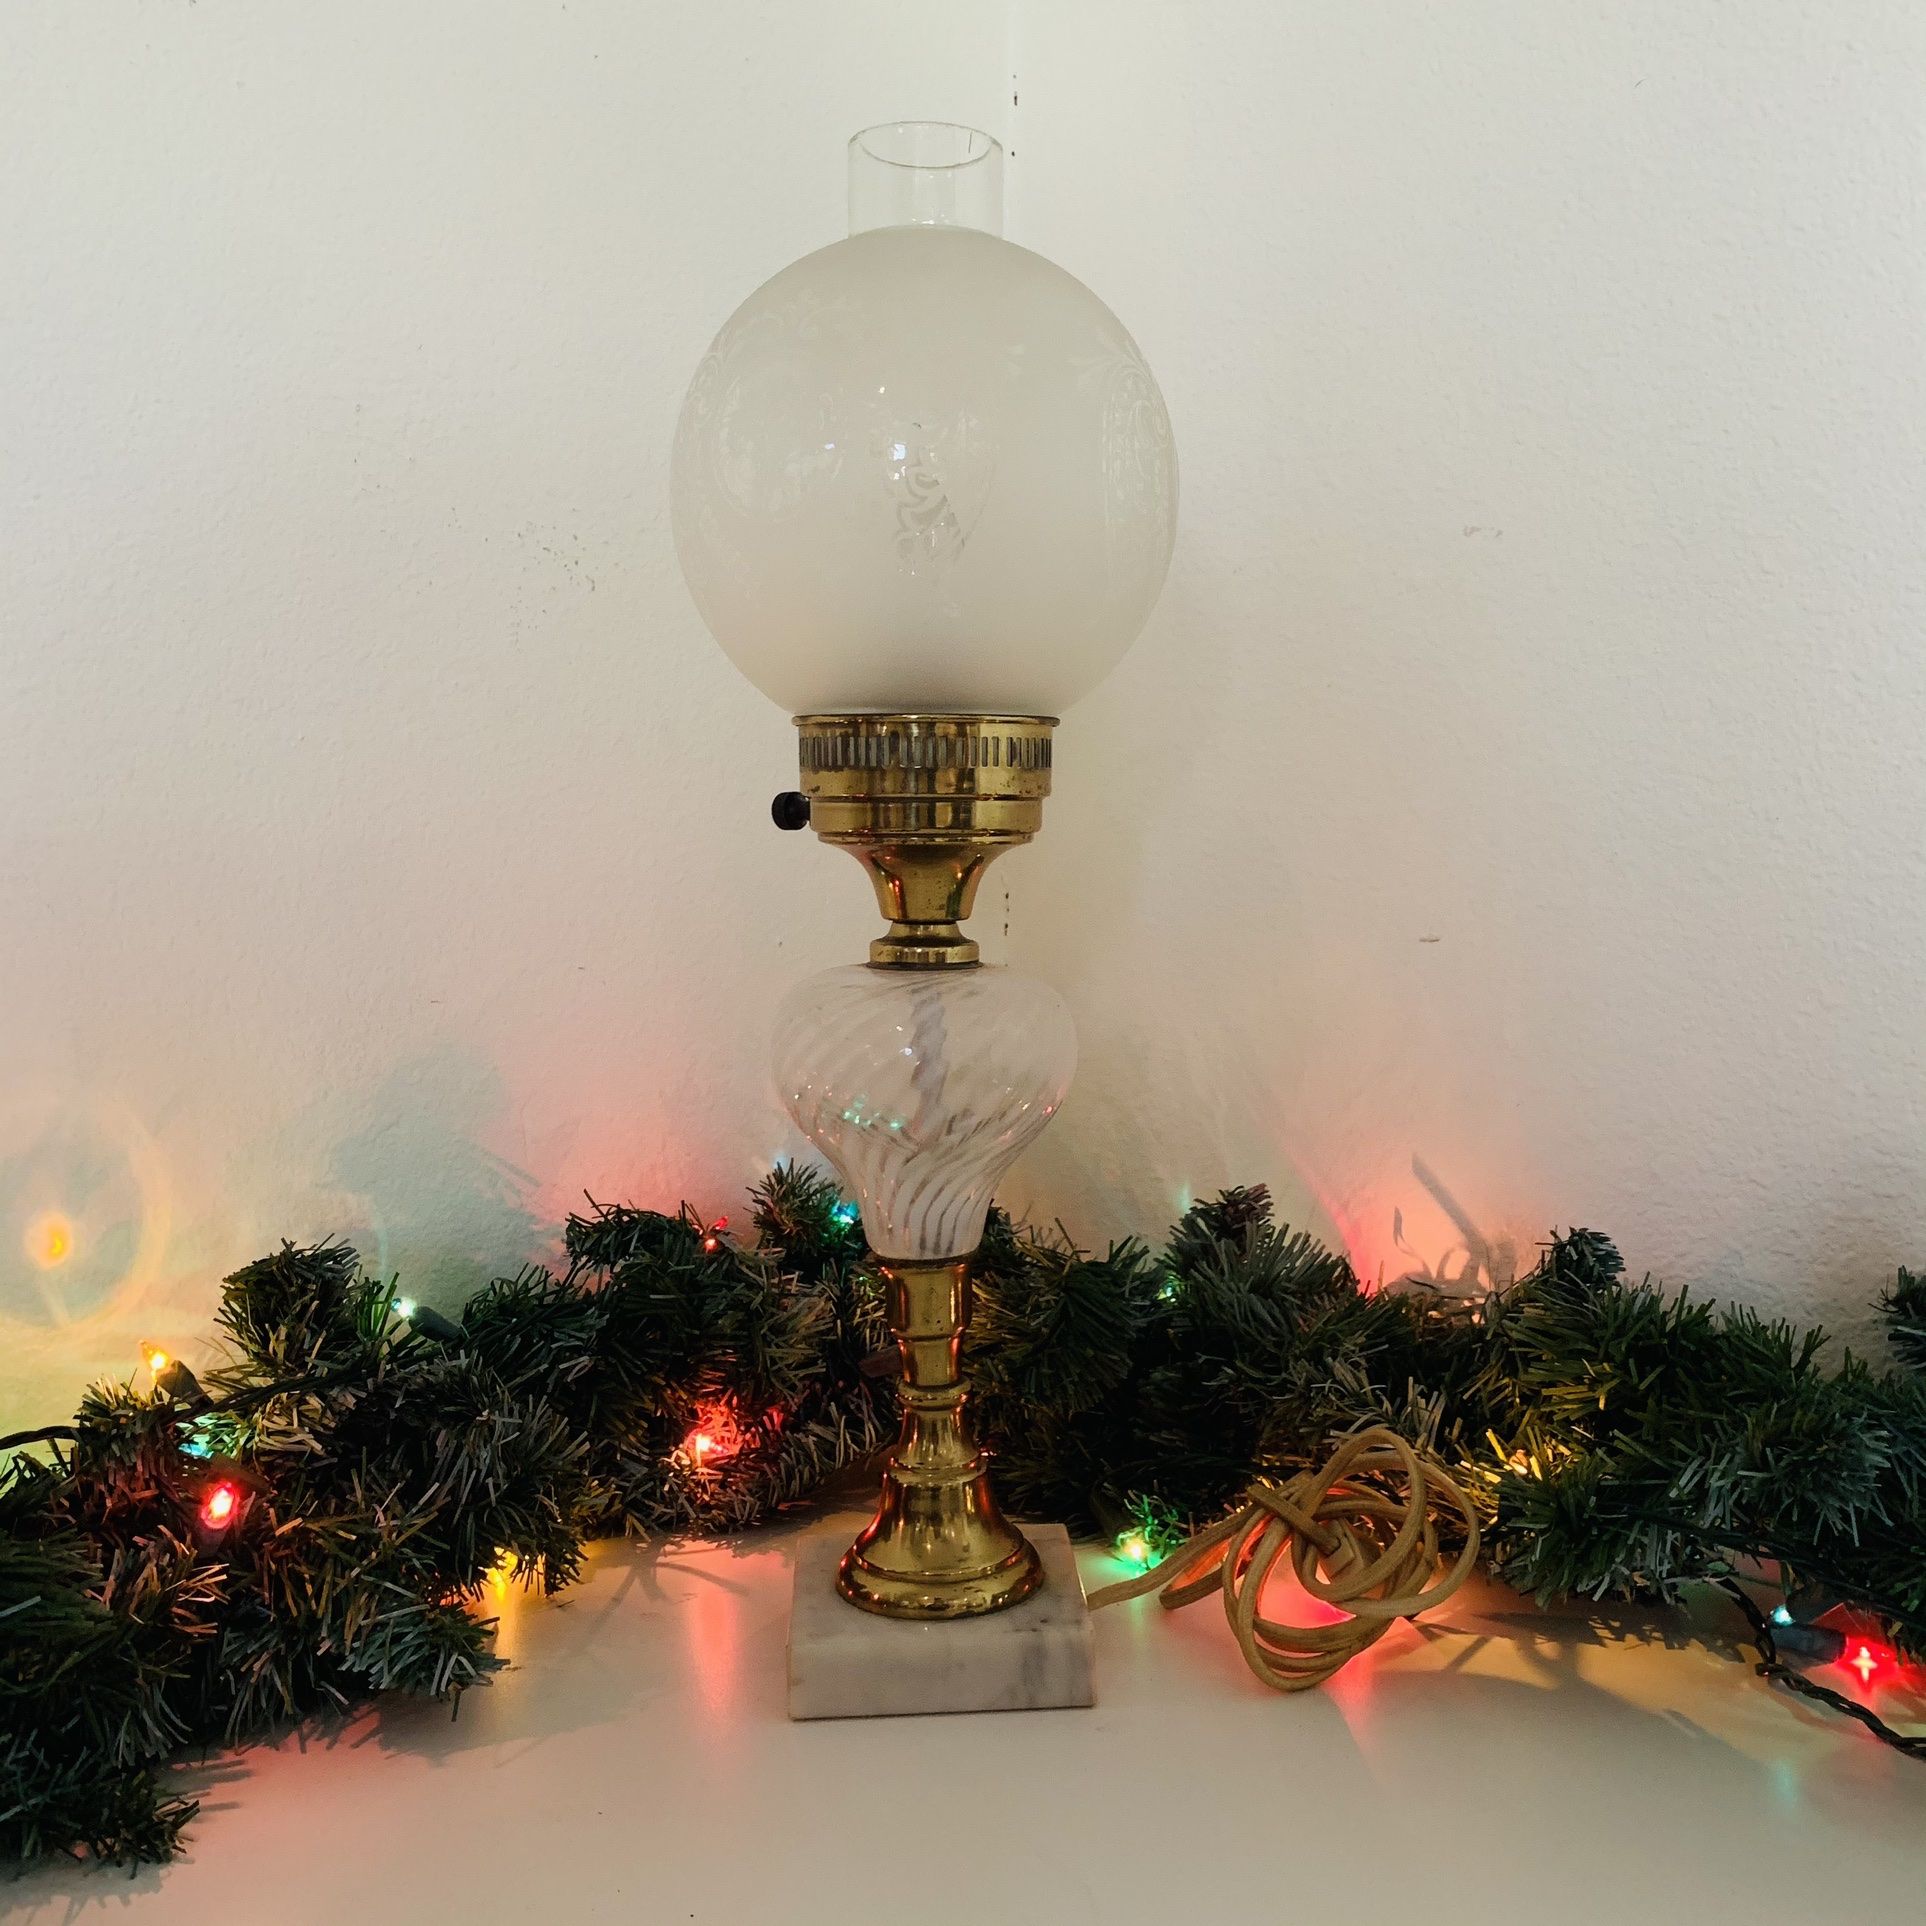 VINTAGE “GONE WITH THE WIND” STYLE LAMP